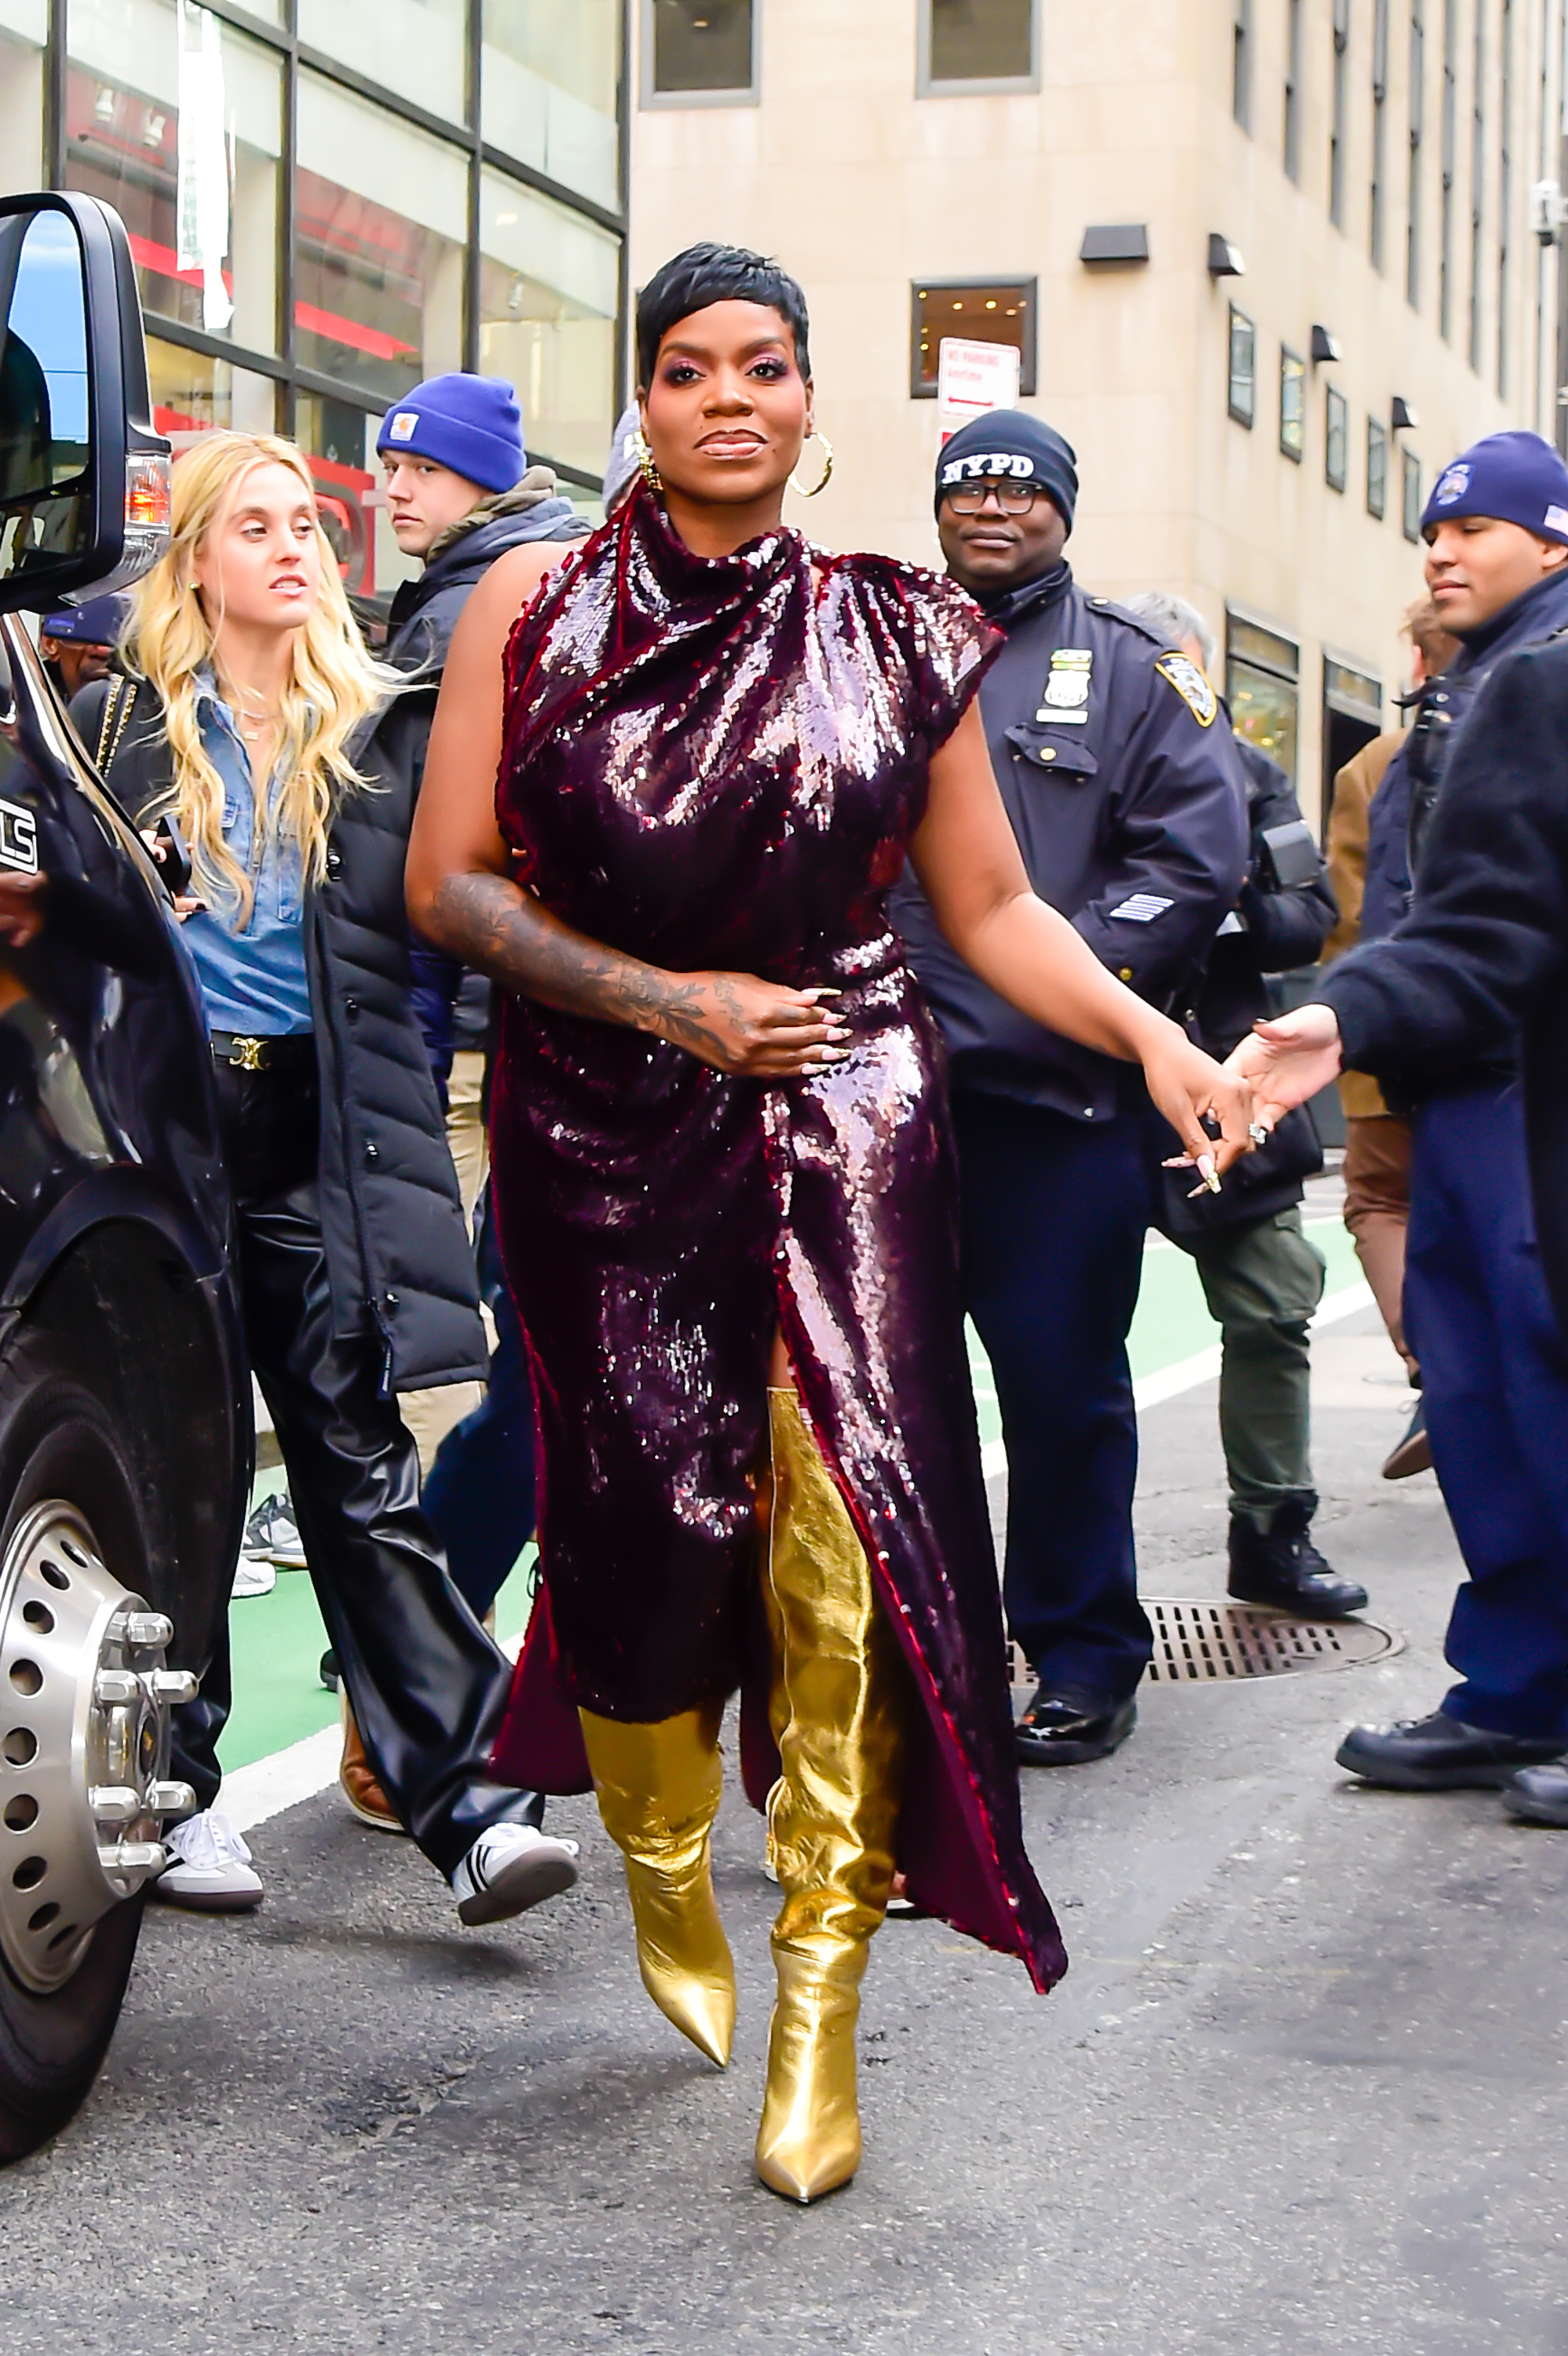 Closeup of Fantasia in a sequined dress and boots